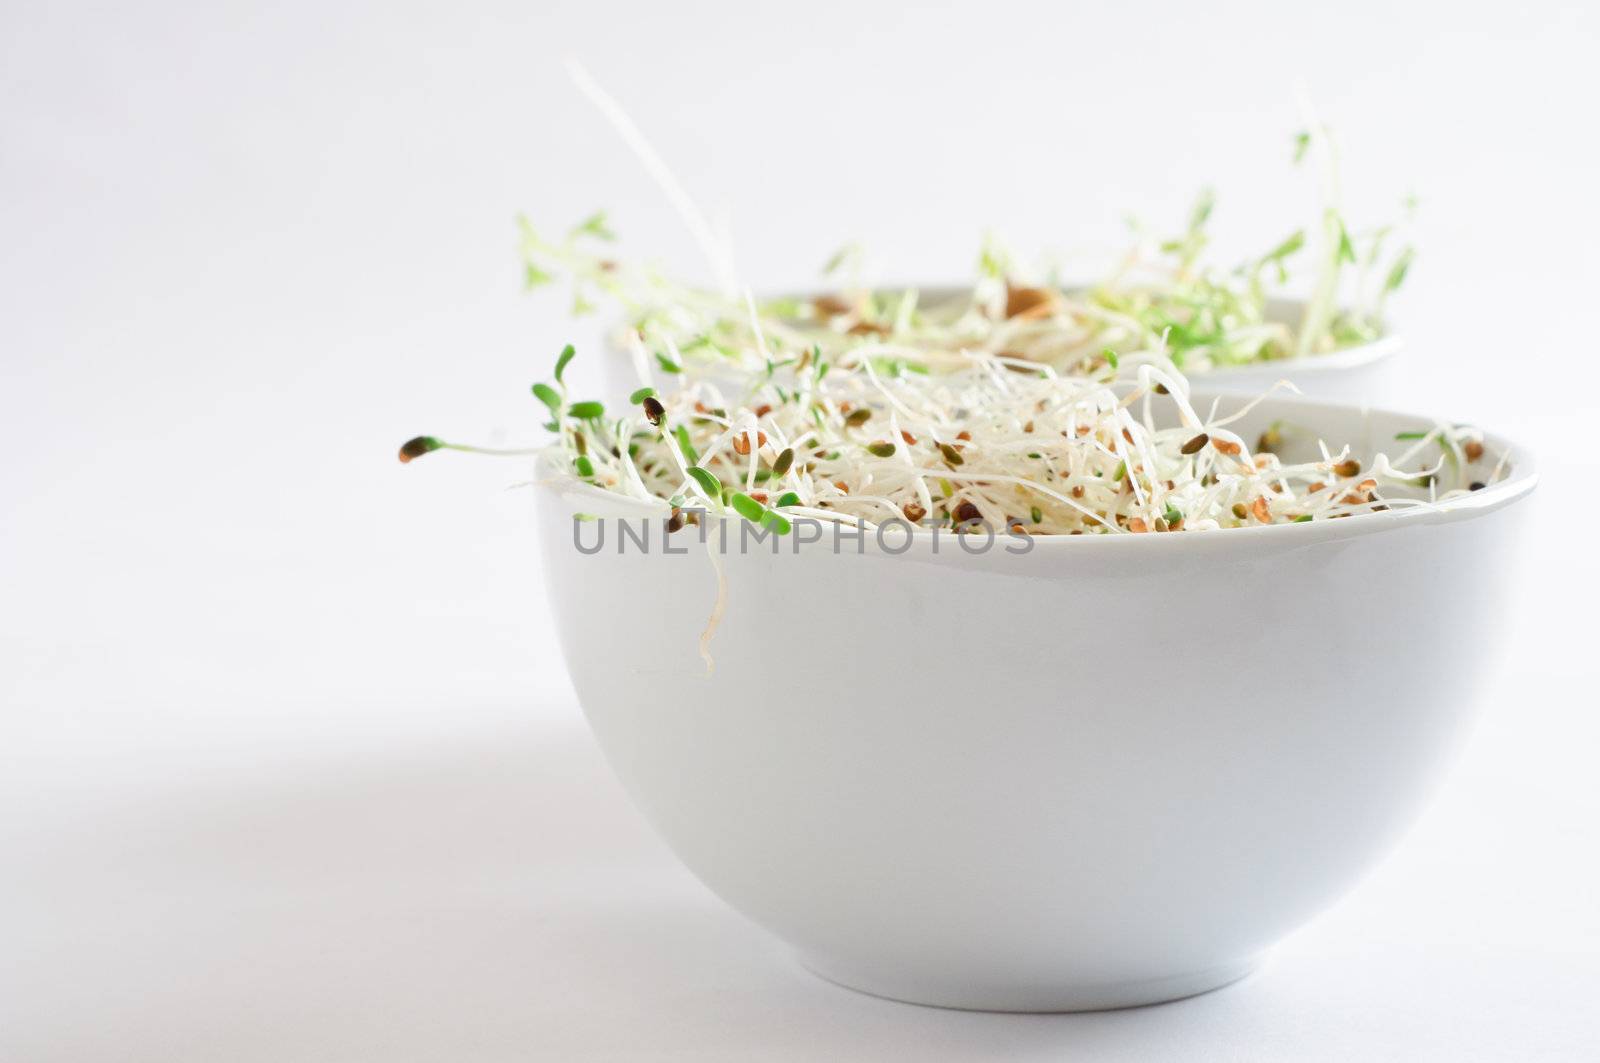 Beansprout Bowls by frannyanne